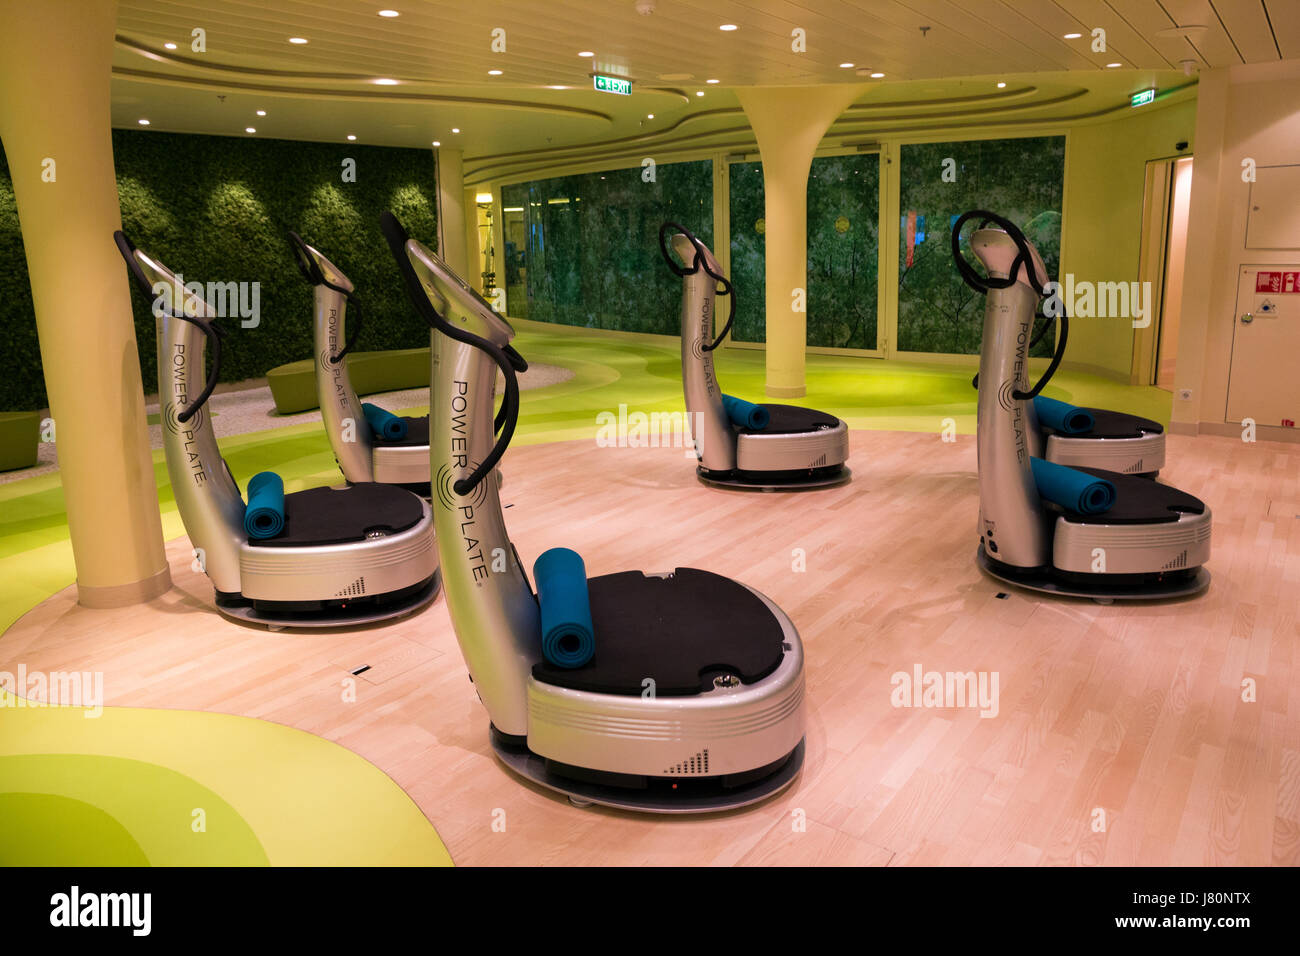 ROTTERDAM - NOV 24, 2016: Power Plates in the fitness center on board of the AIDAprima cruise ship. Stock Photo